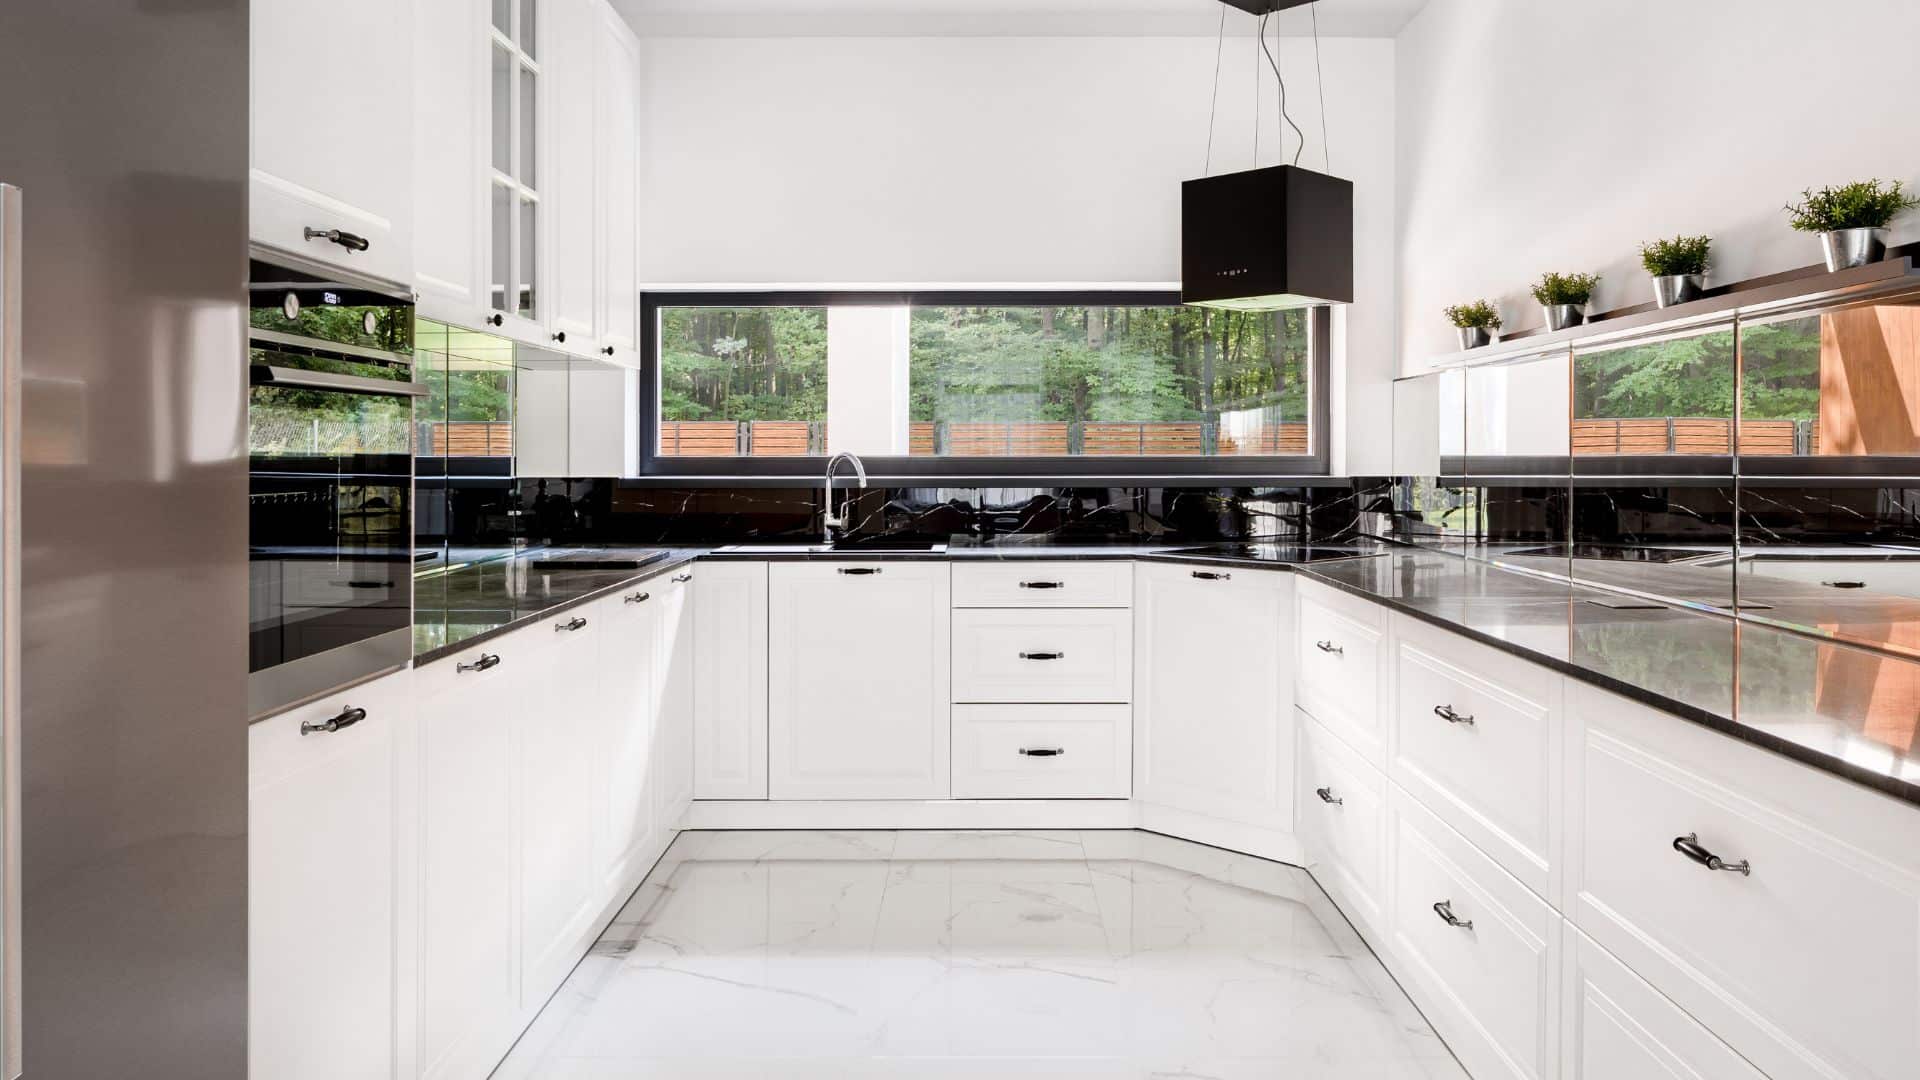 U-shaped kitchen with white shaker cabinets and black countertops